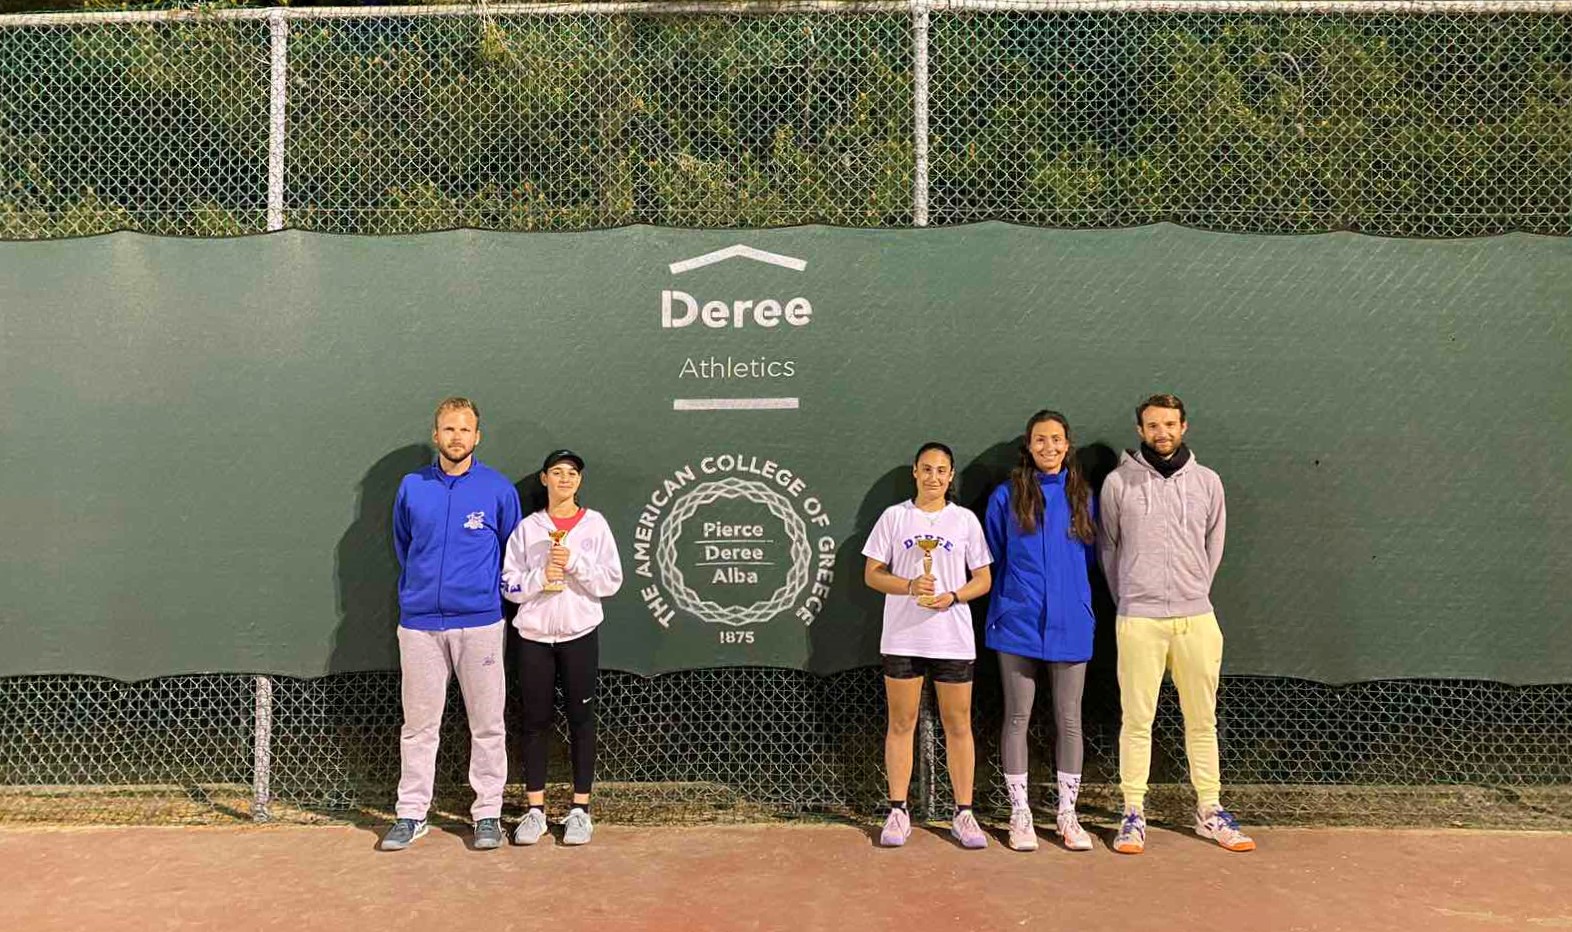 Results of the E3 tennis tournament in Vari.